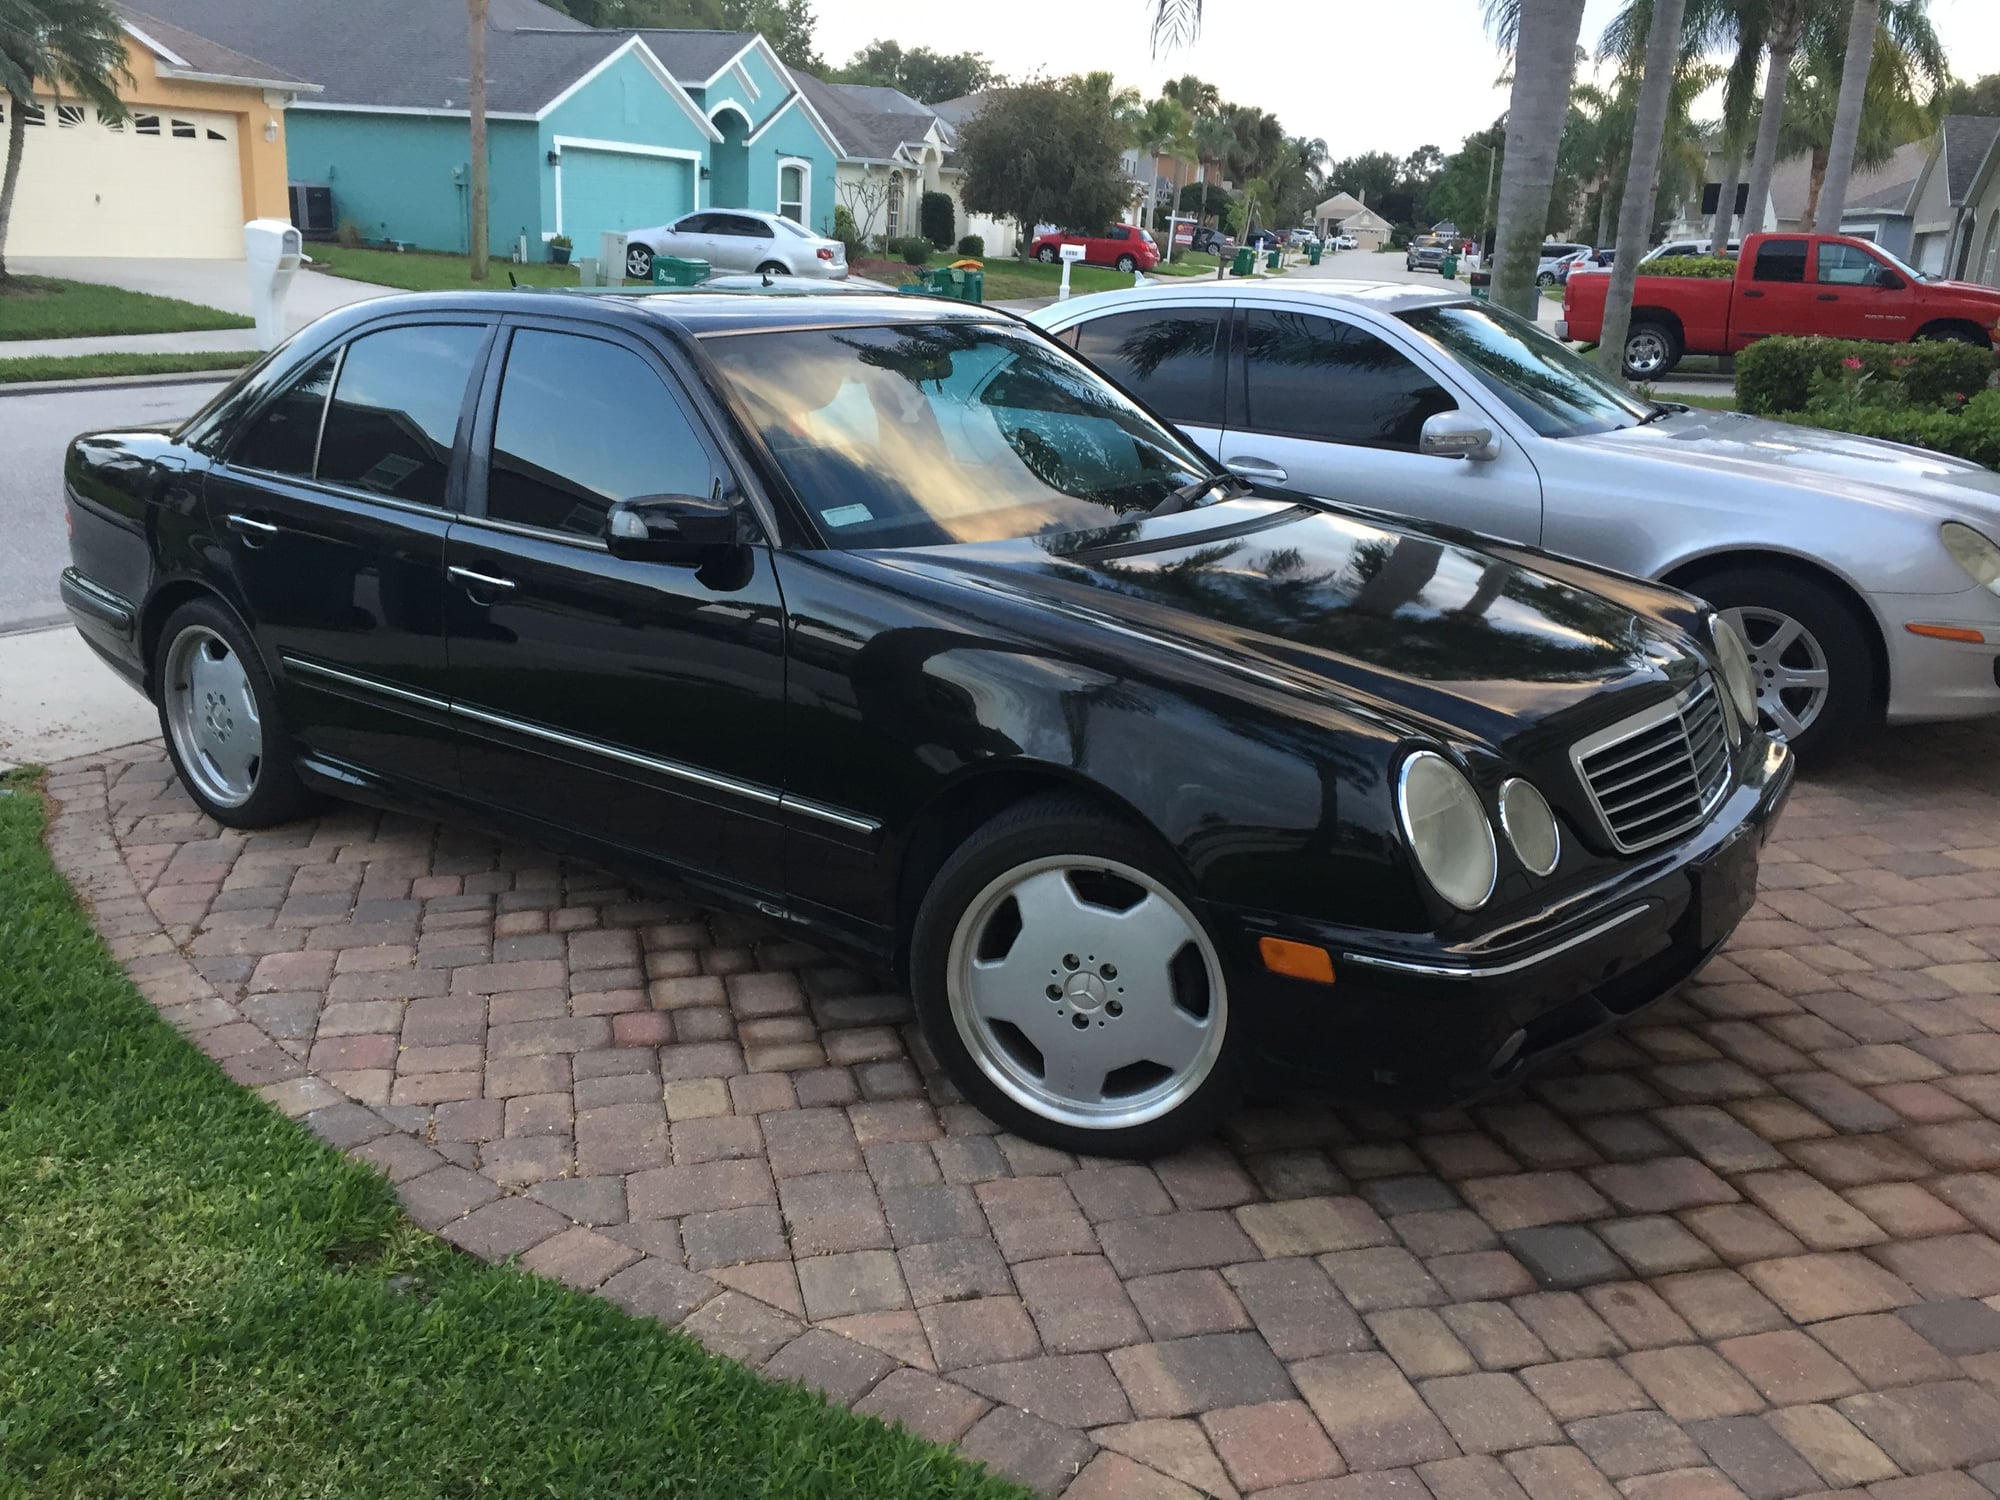 2001 Mercedes-Benz E55 AMG - 2001 E55 with extensive service history - Used - VIN WDBJF74J91B179514 - 172,000 Miles - 8 cyl - 2WD - Automatic - Sedan - Black - Melbourne, FL 32901, United States